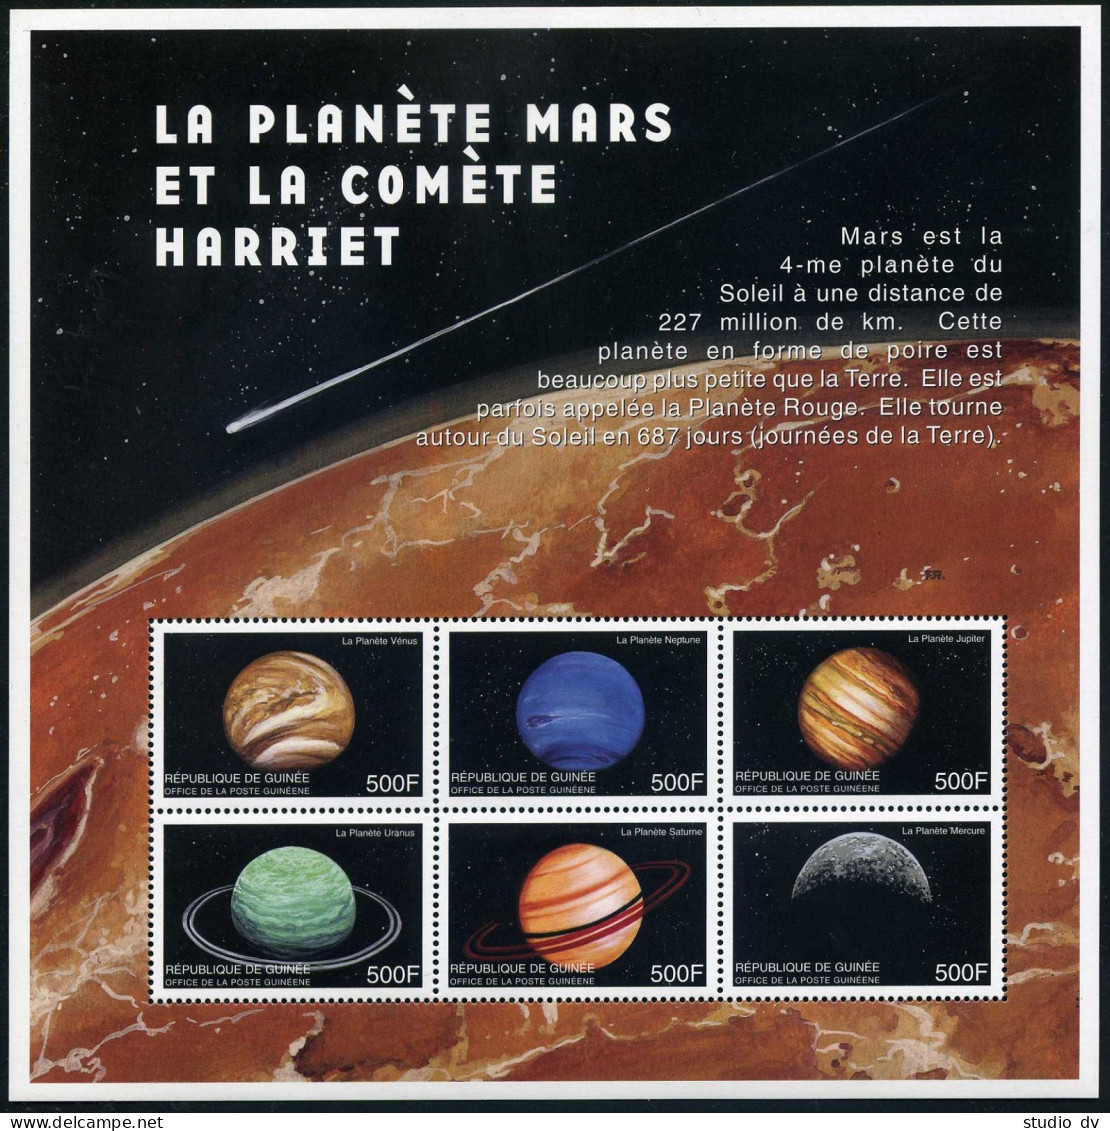 Guinea 1613-1614 Af Sheets,MNH. Space Exploration,1999.Planets.Mariners,Phobos, - Guinee (1958-...)